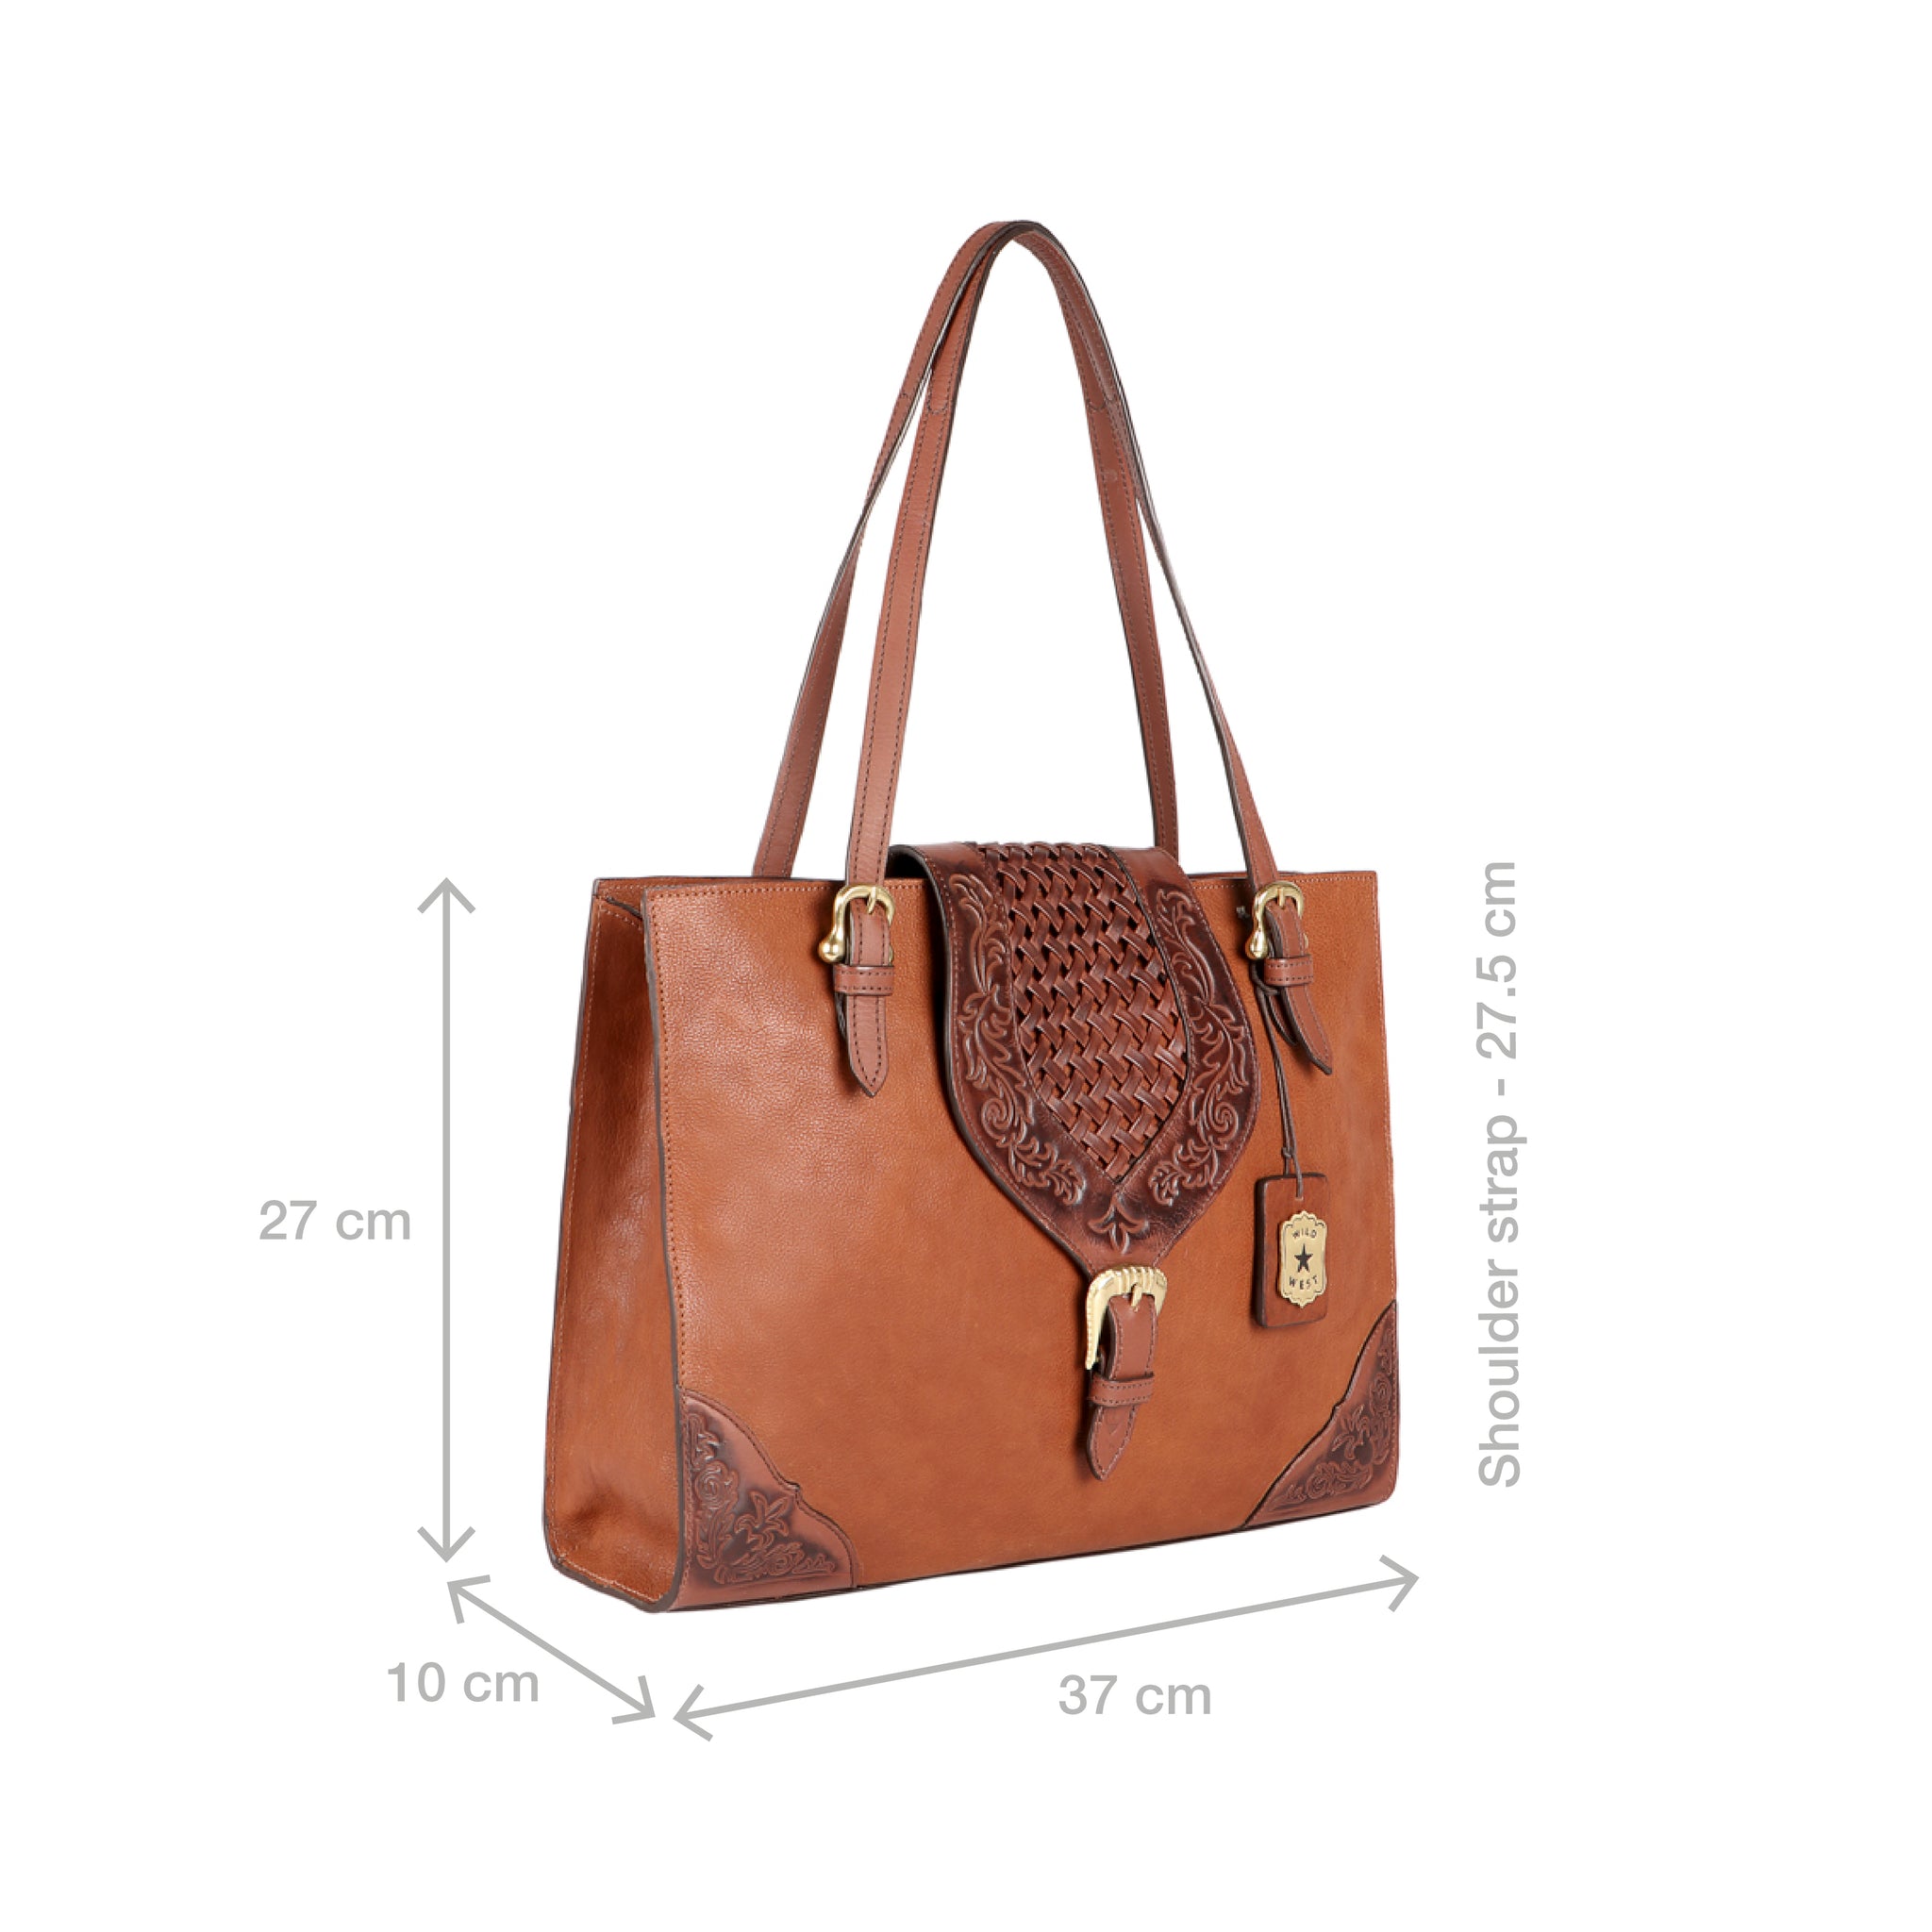 Hidesign womens WHITNEY II Large Brown Tote Bag : Amazon.in: Fashion